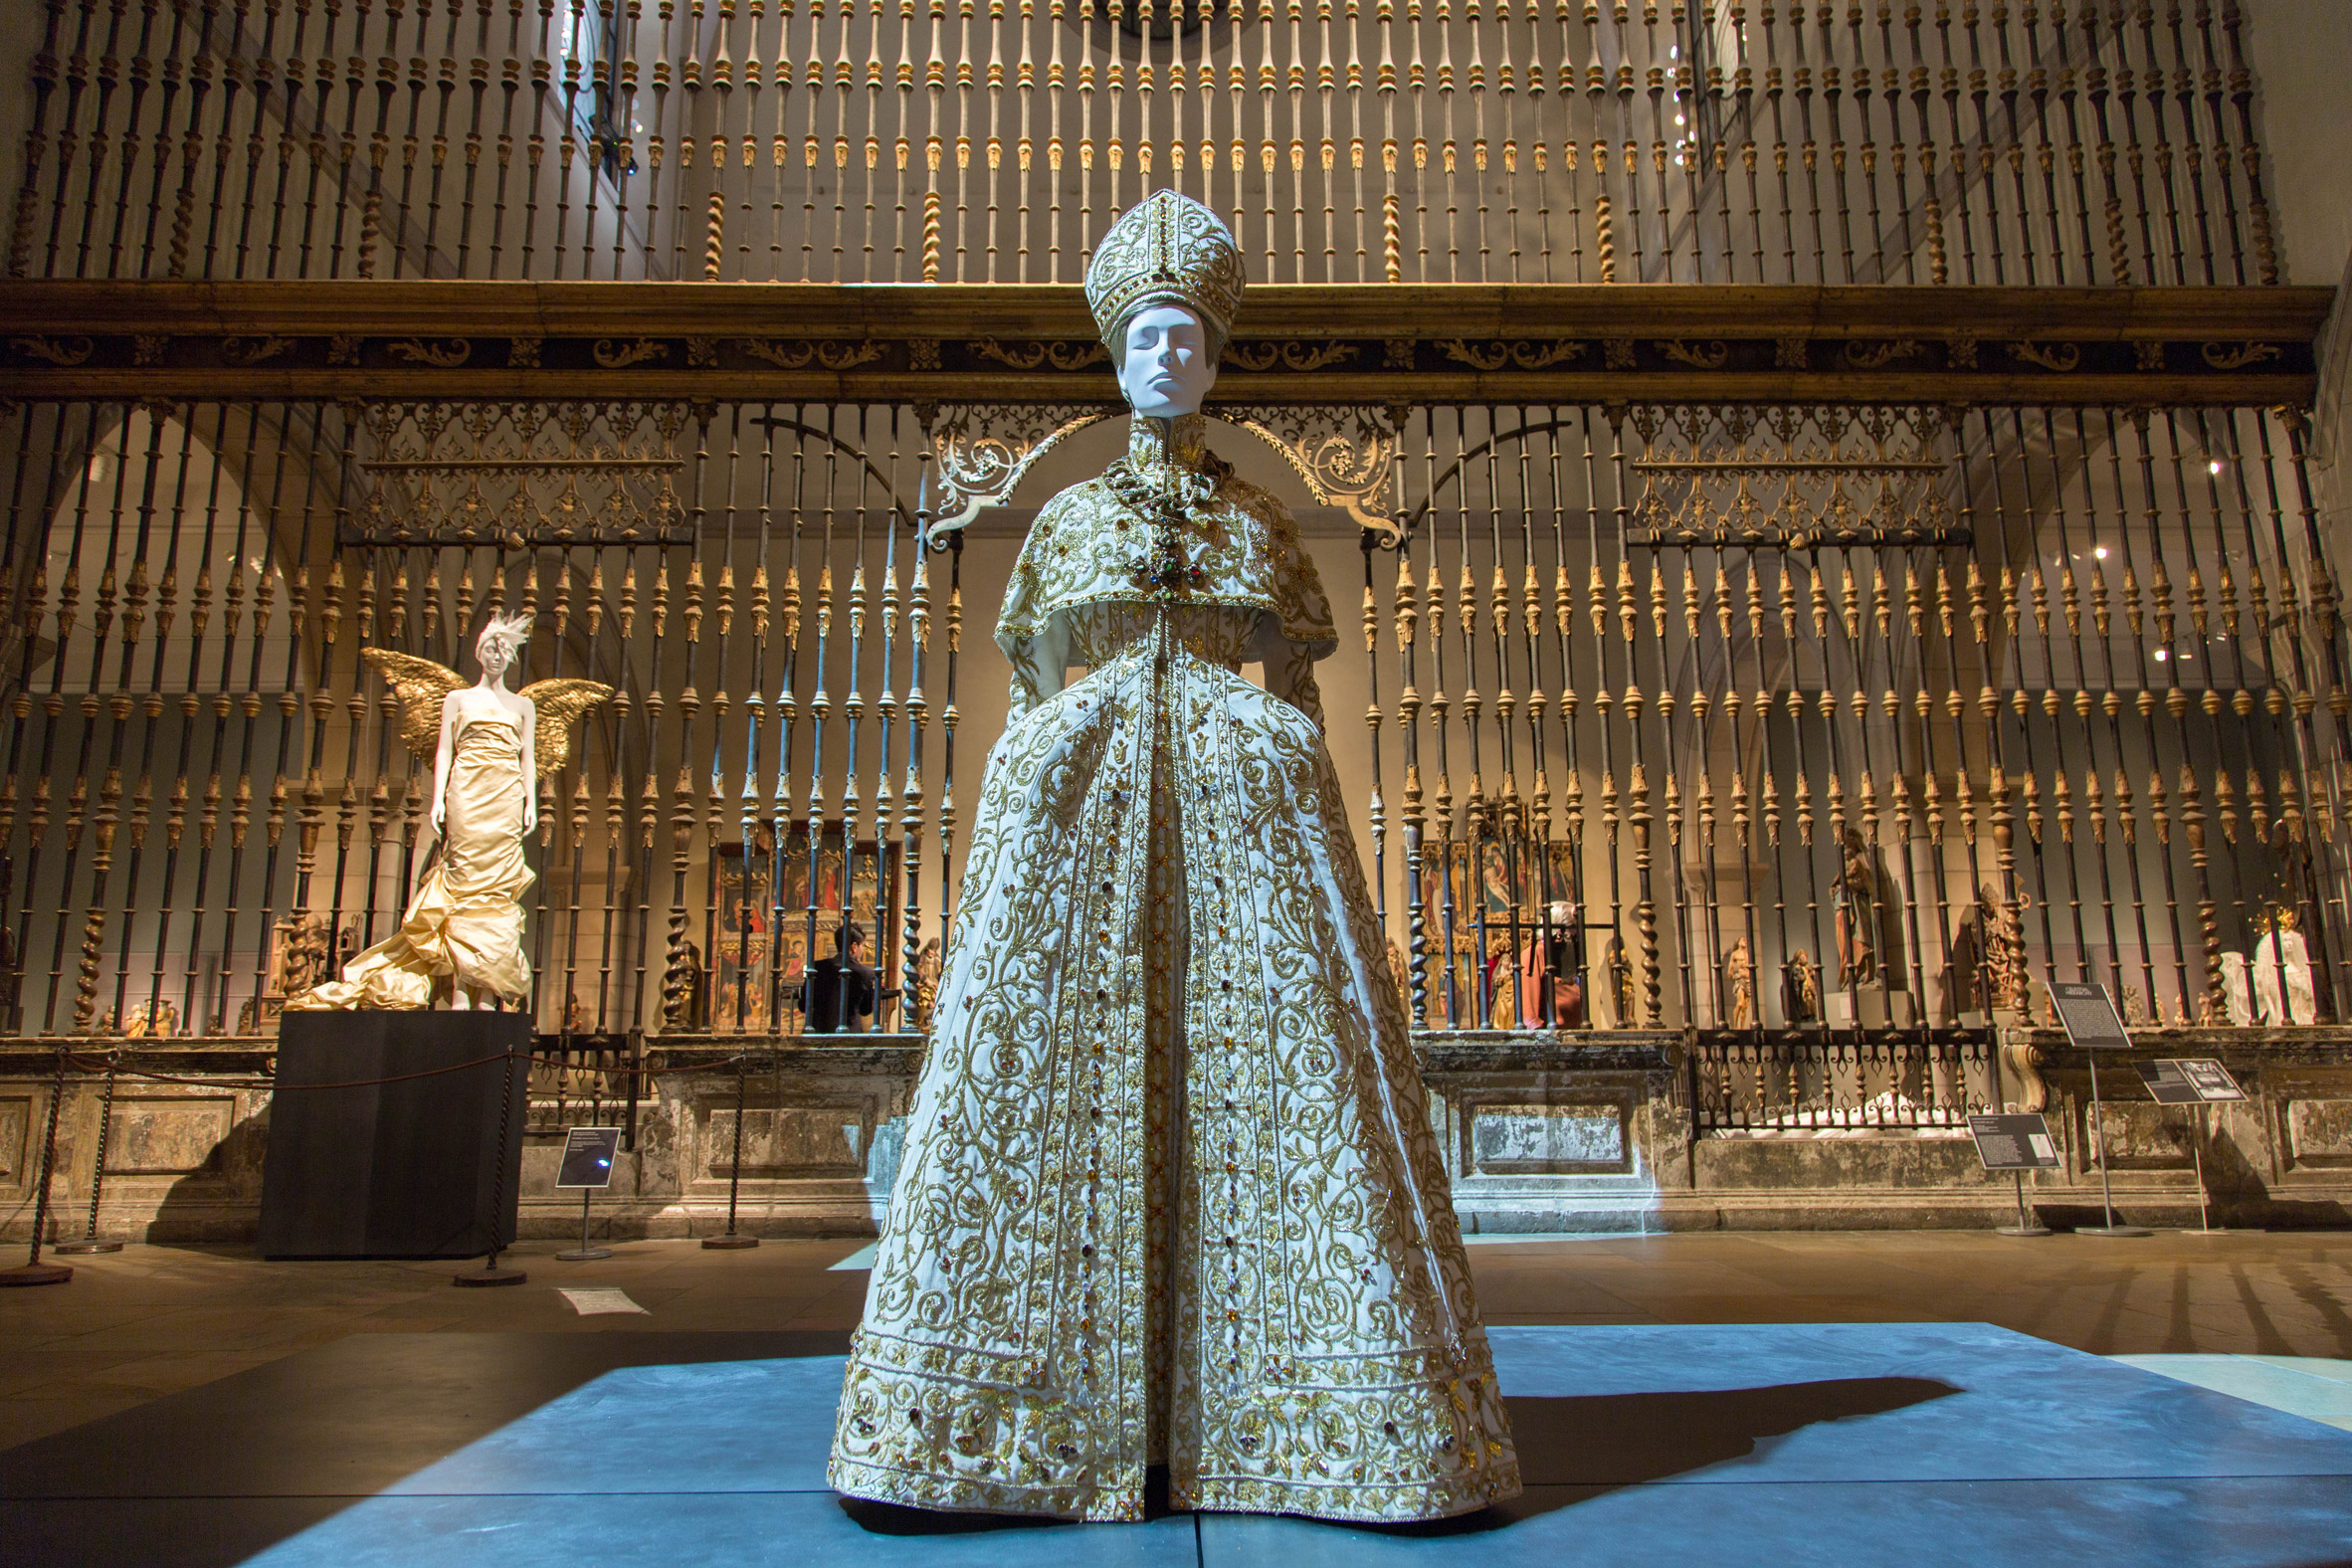 Among the Heavenly Bodies on Display at the Costume Institute's